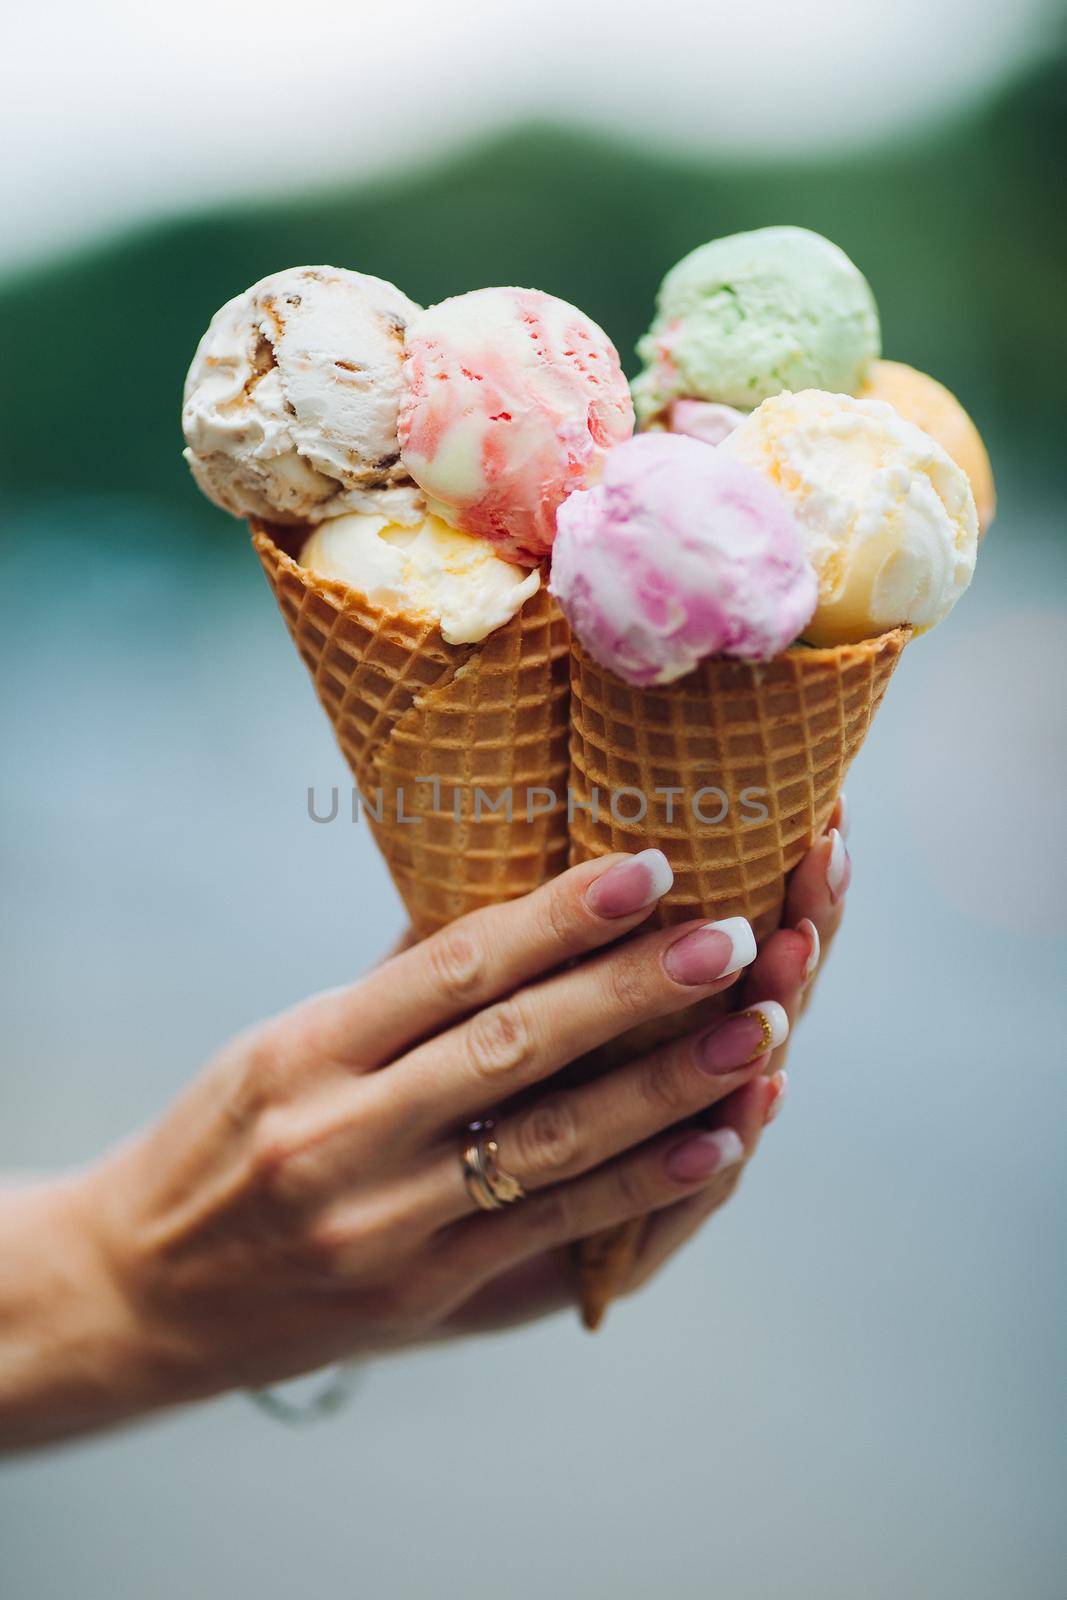 Crop of woman's hand holding delicious colorful ice cream. by StudioLucky